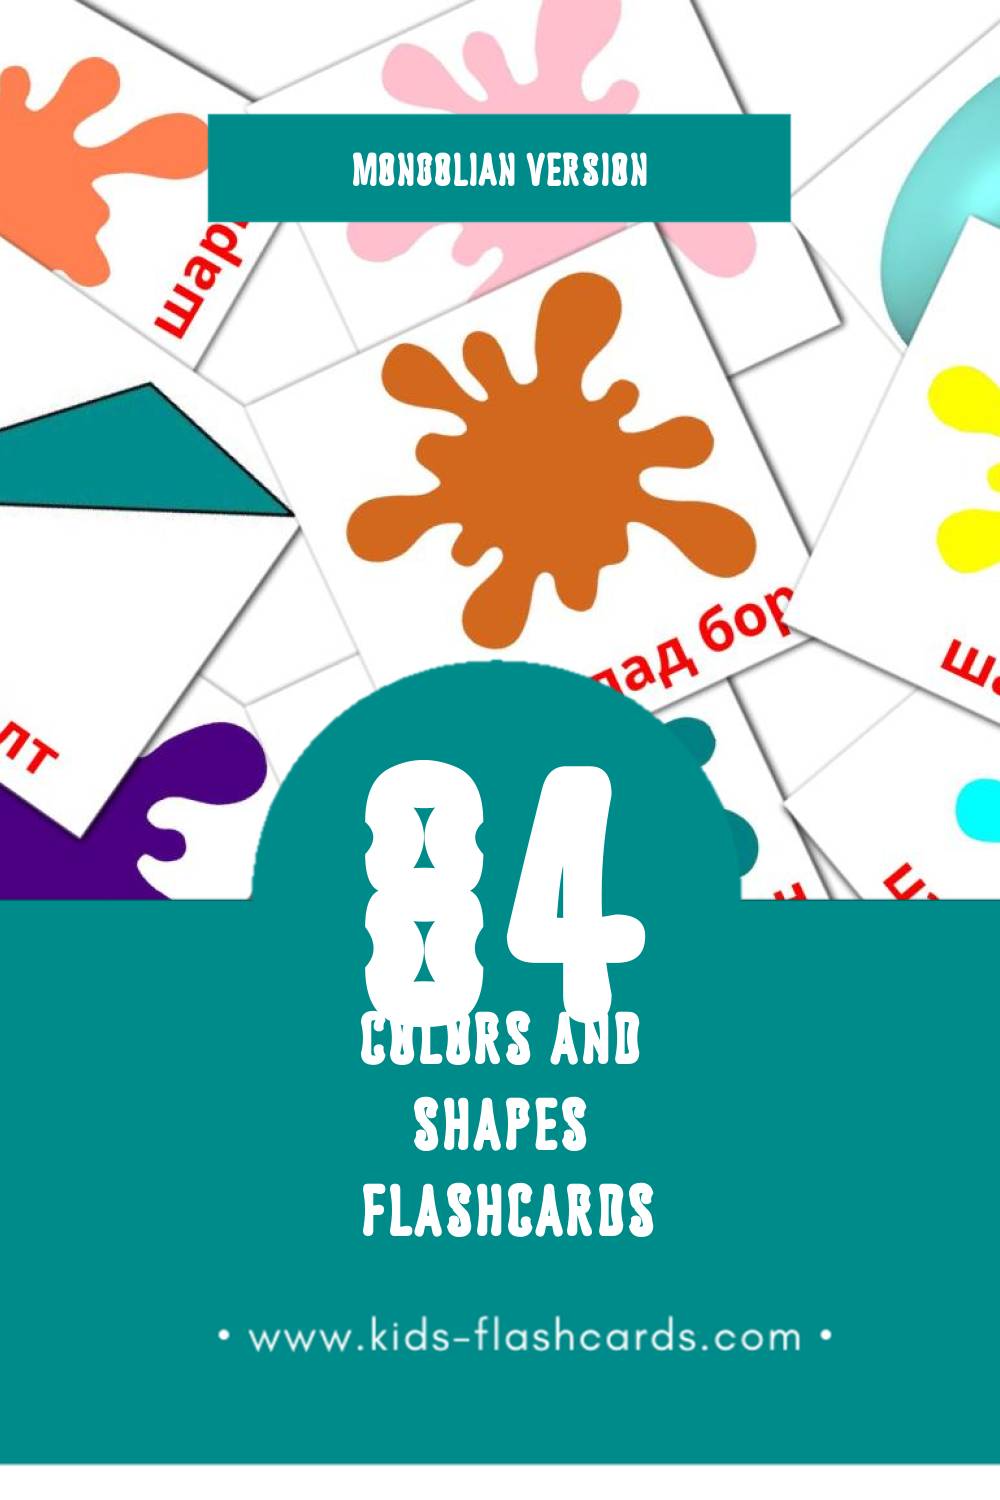 Visual Завсарын өнгө Flashcards for Toddlers (84 cards in Mongolian)